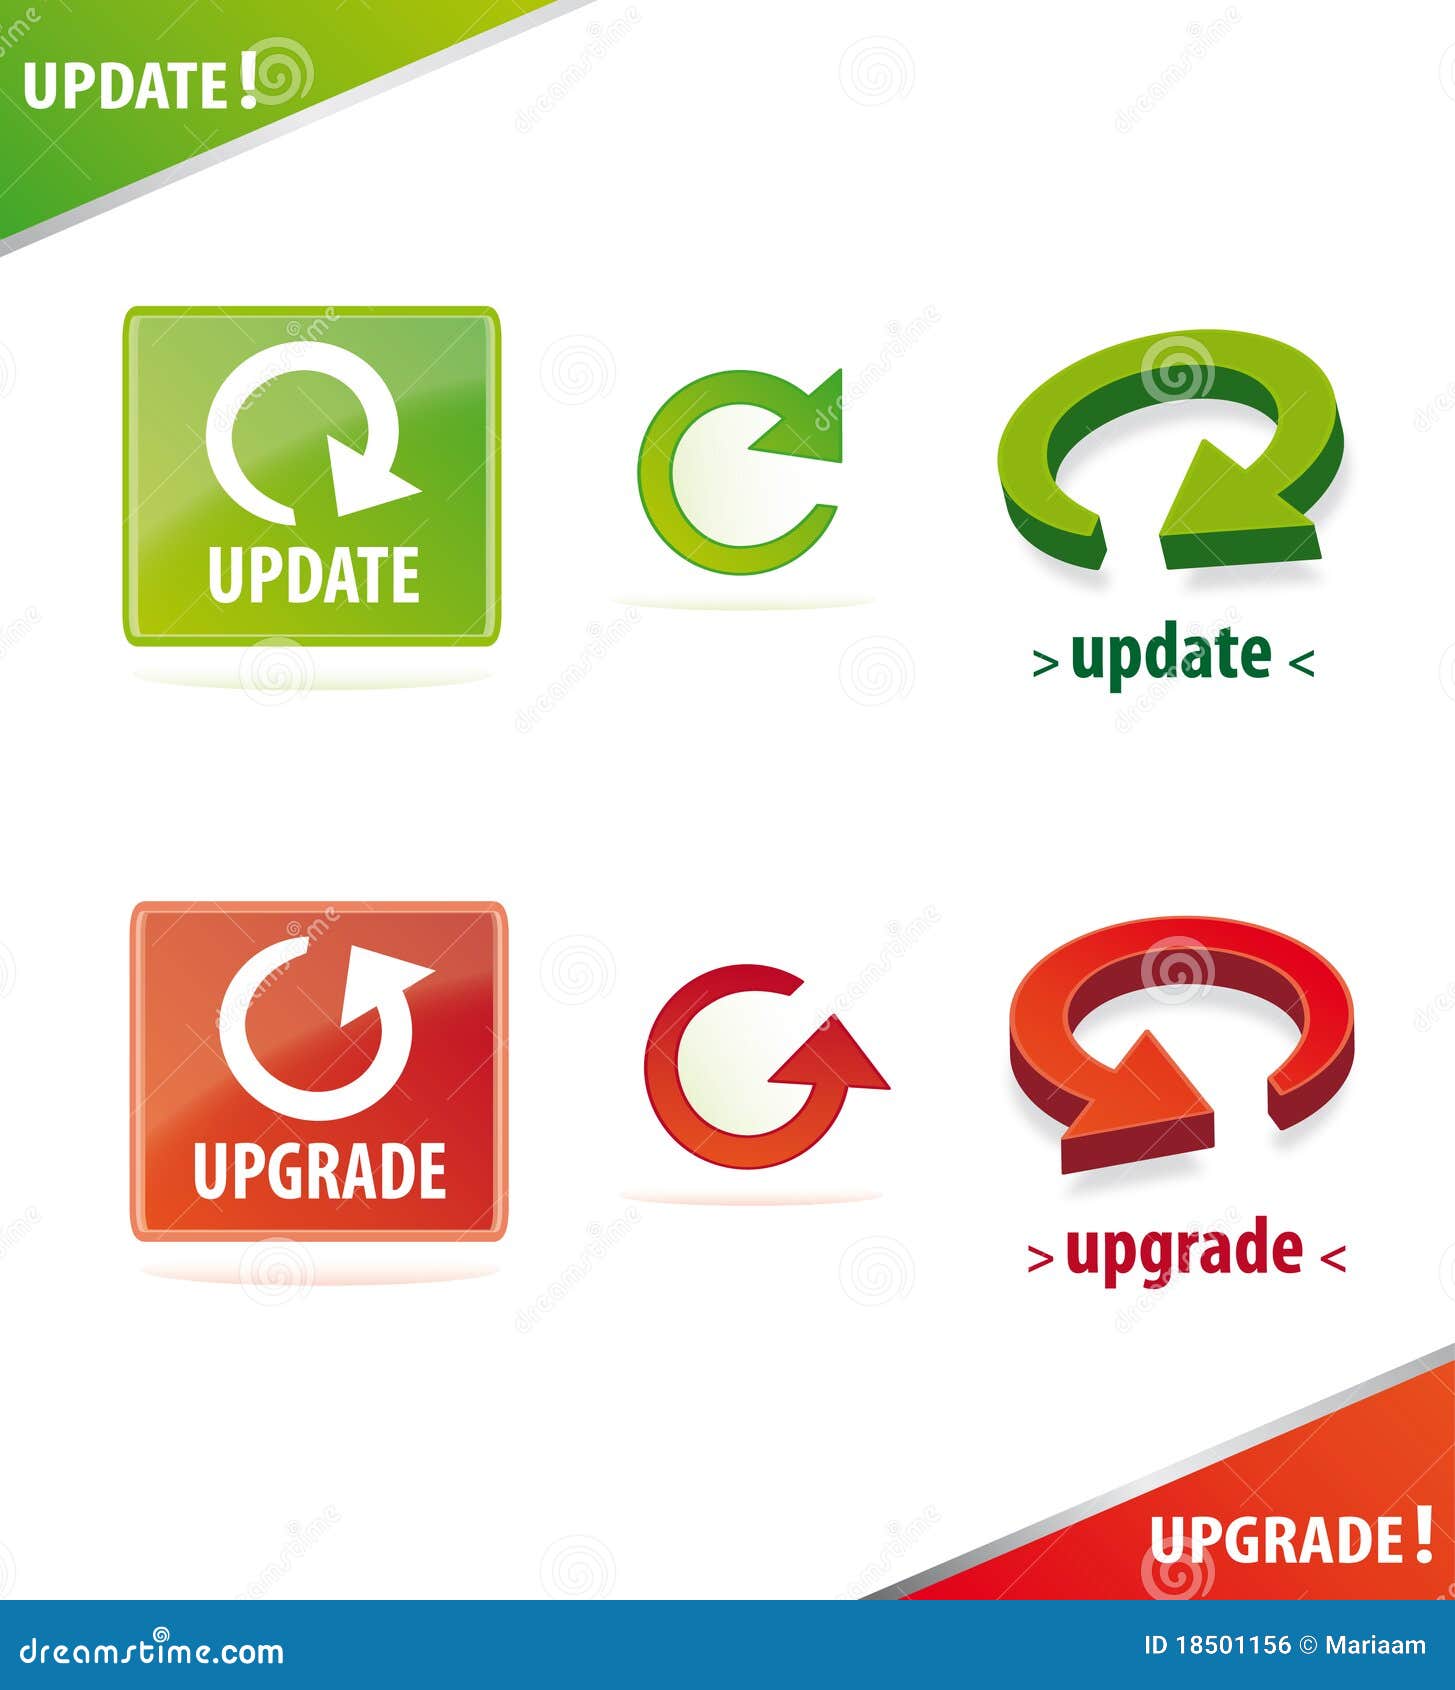 dimensional update and upgrade icon set